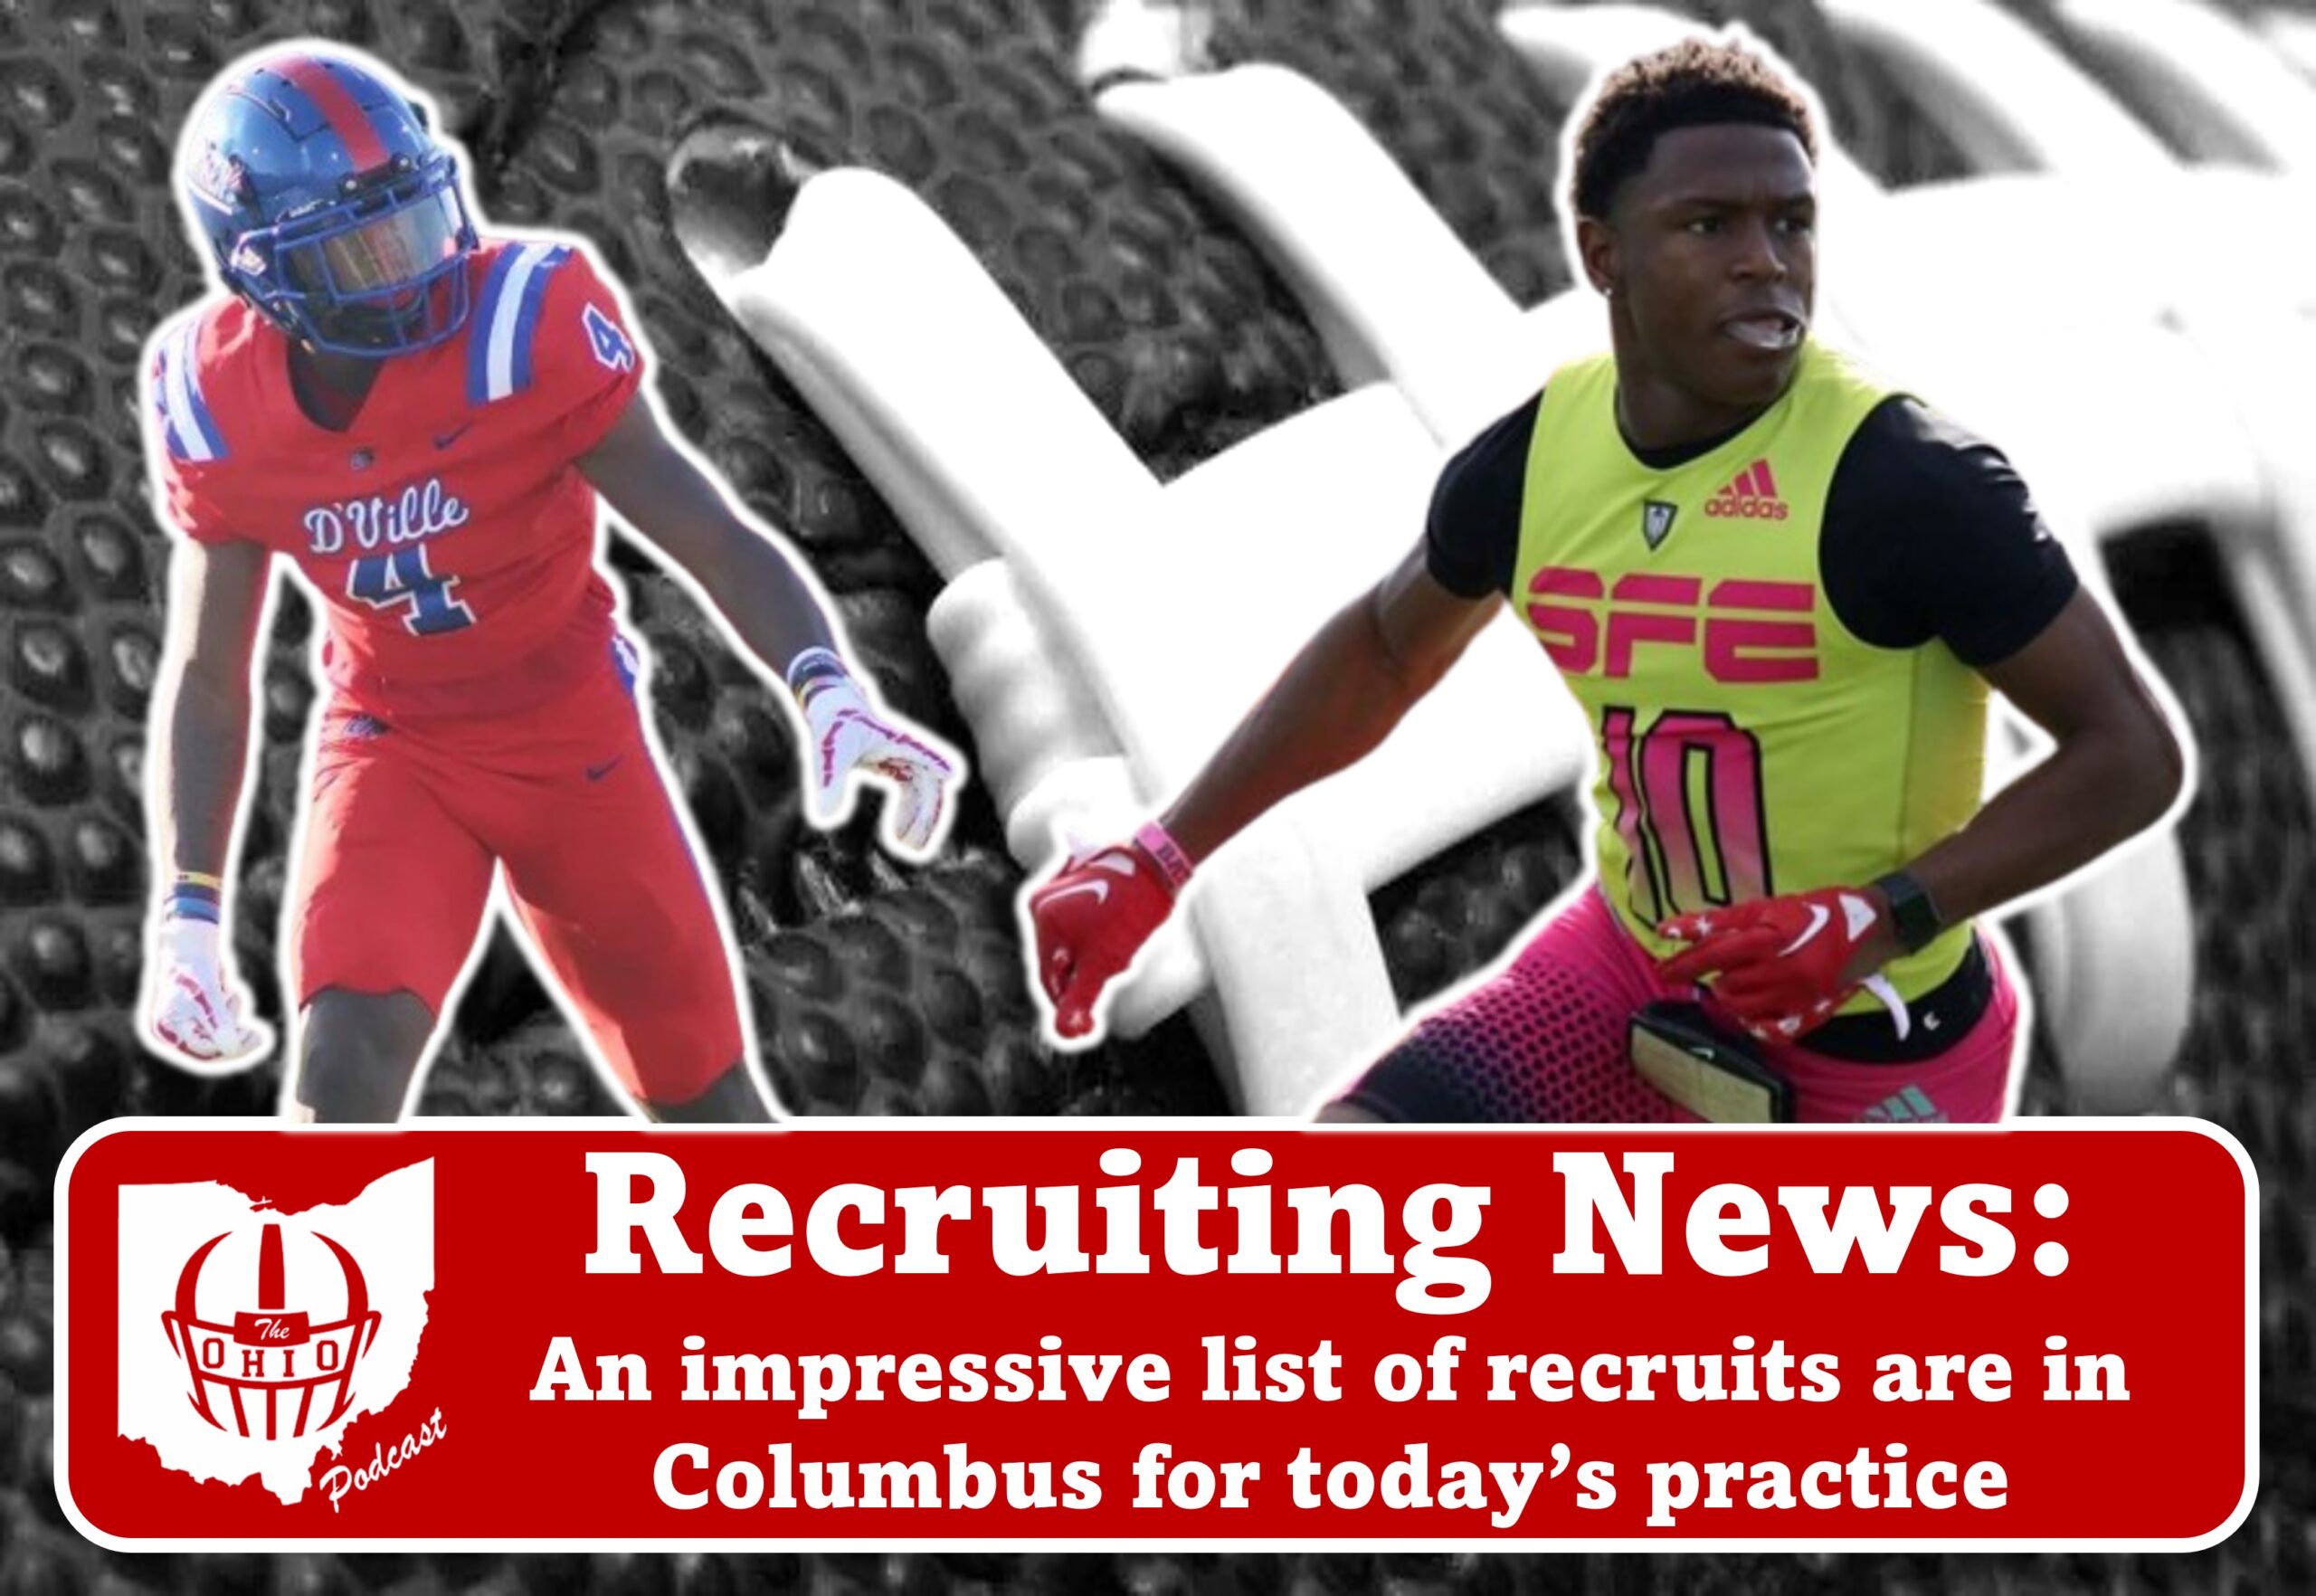 An impressive list of recruits are in Columbus